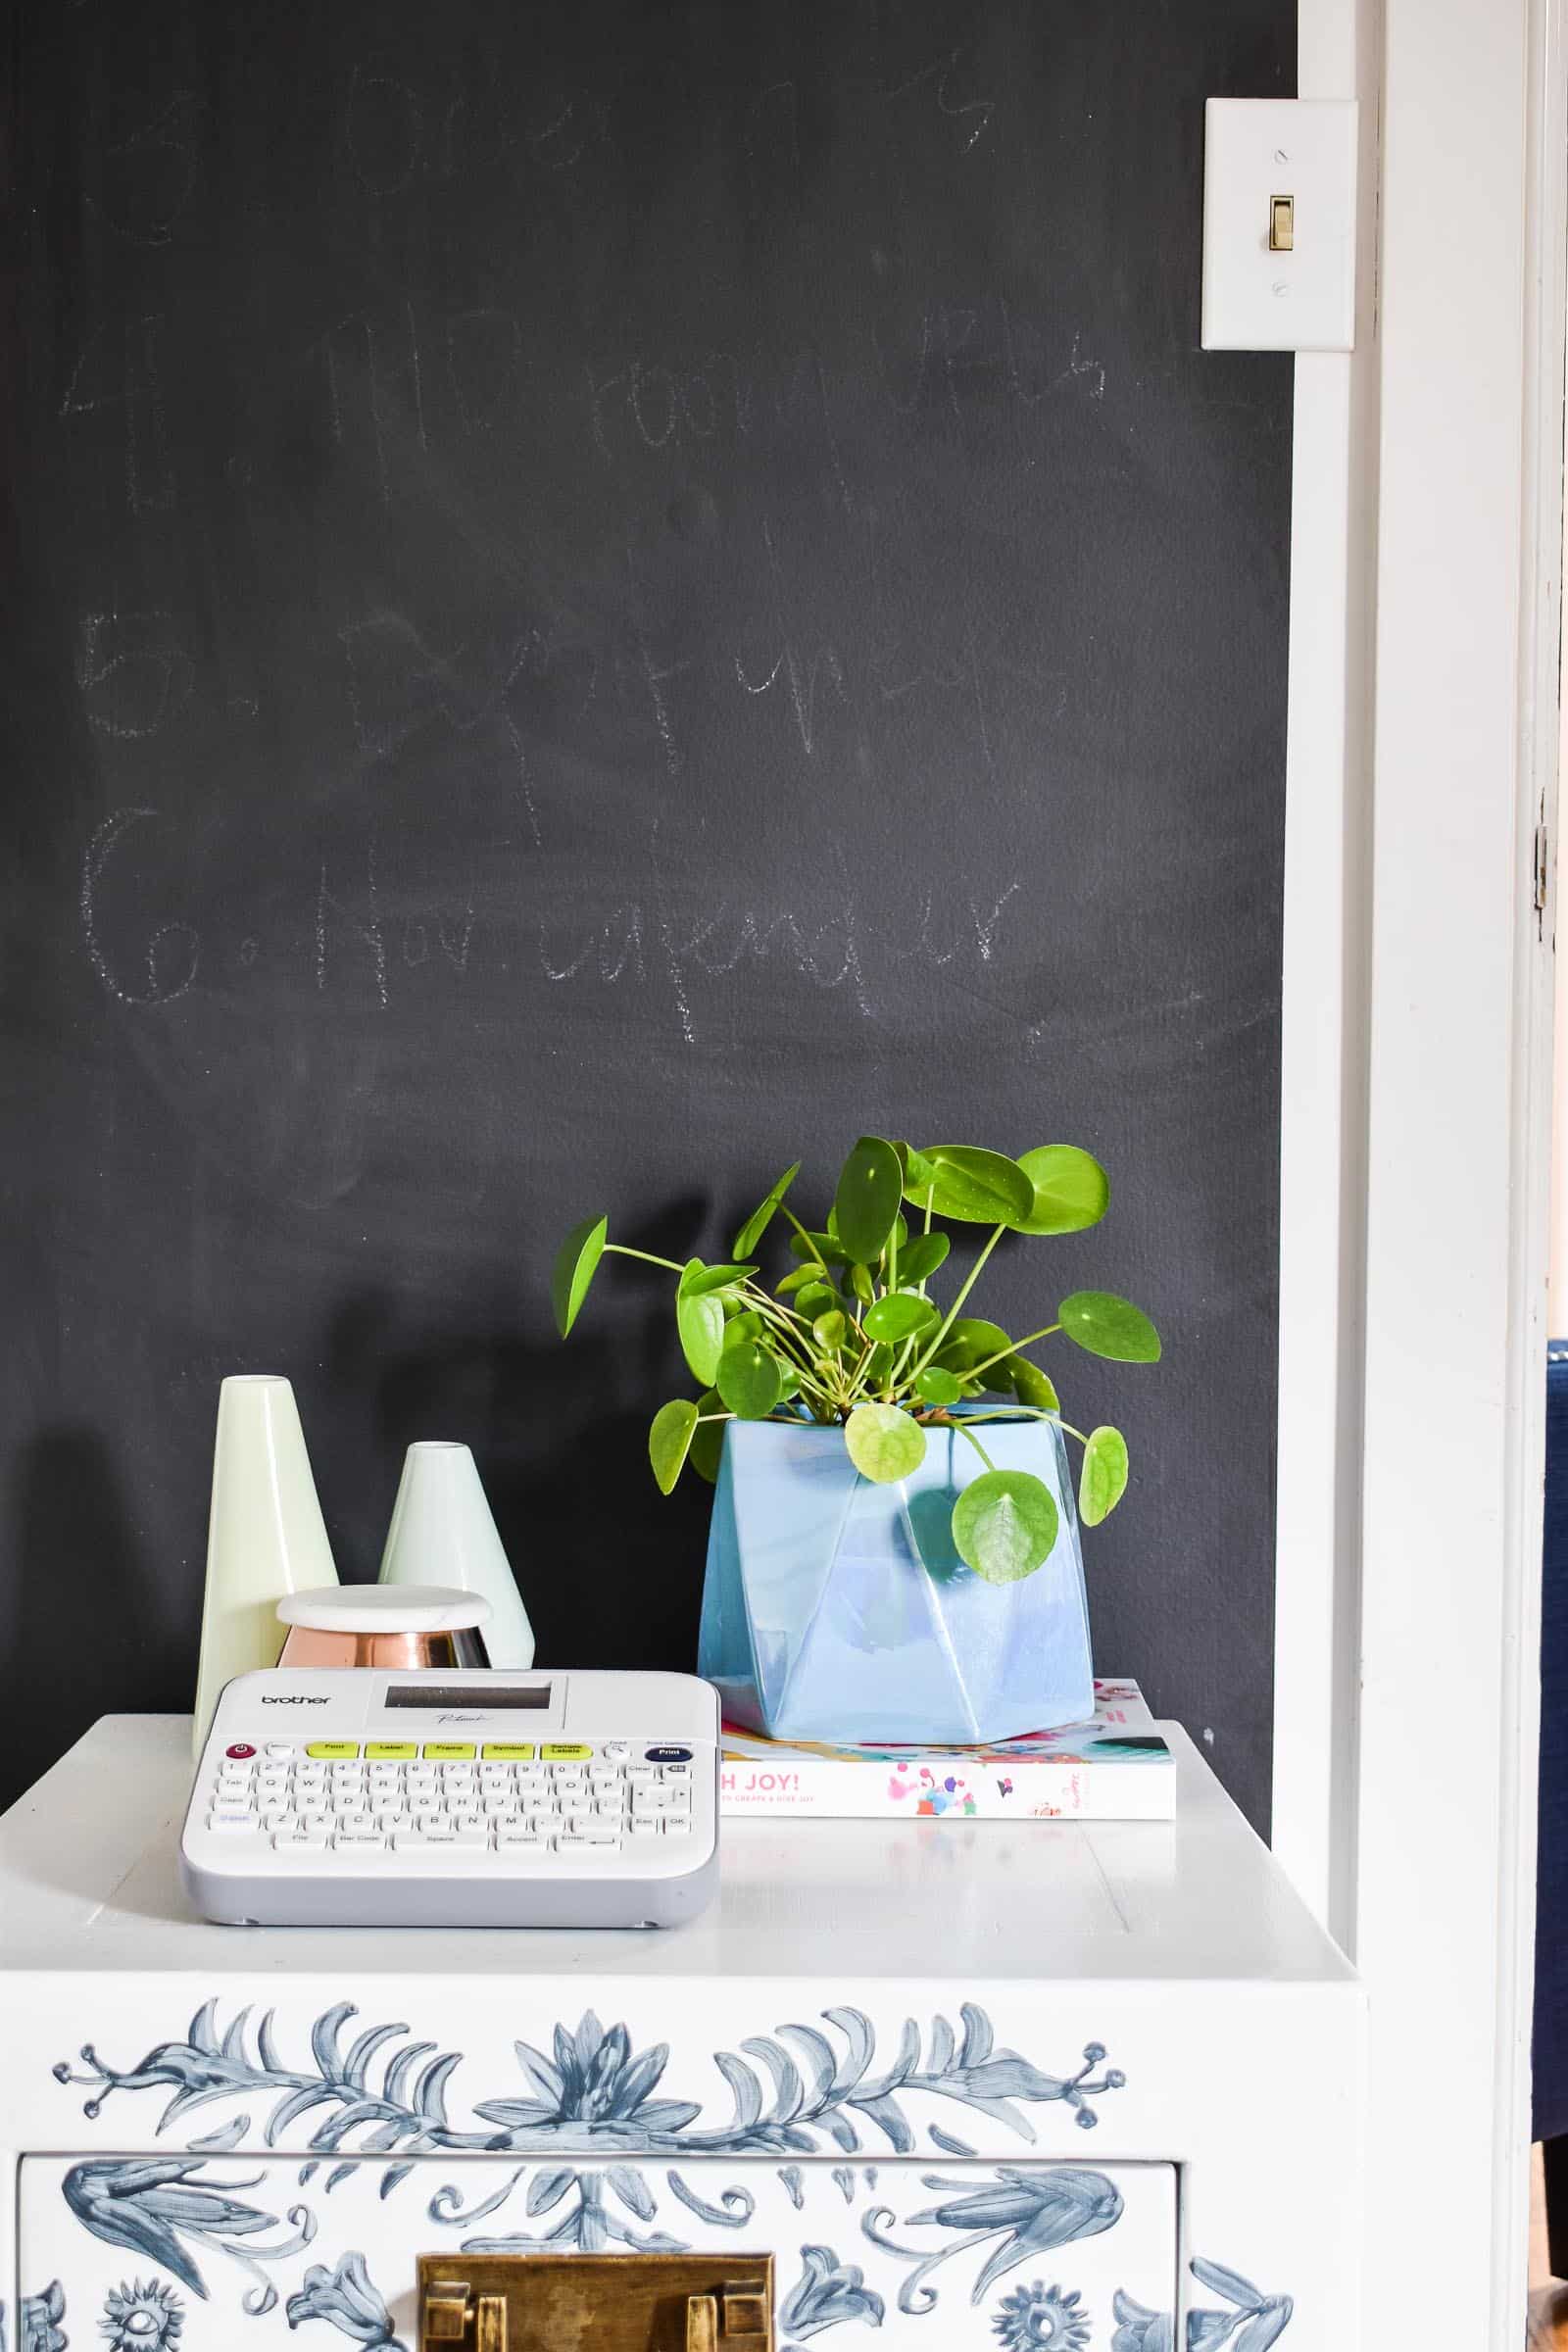 Painting the Perfect Chalkboard Wall - At Charlotte's House